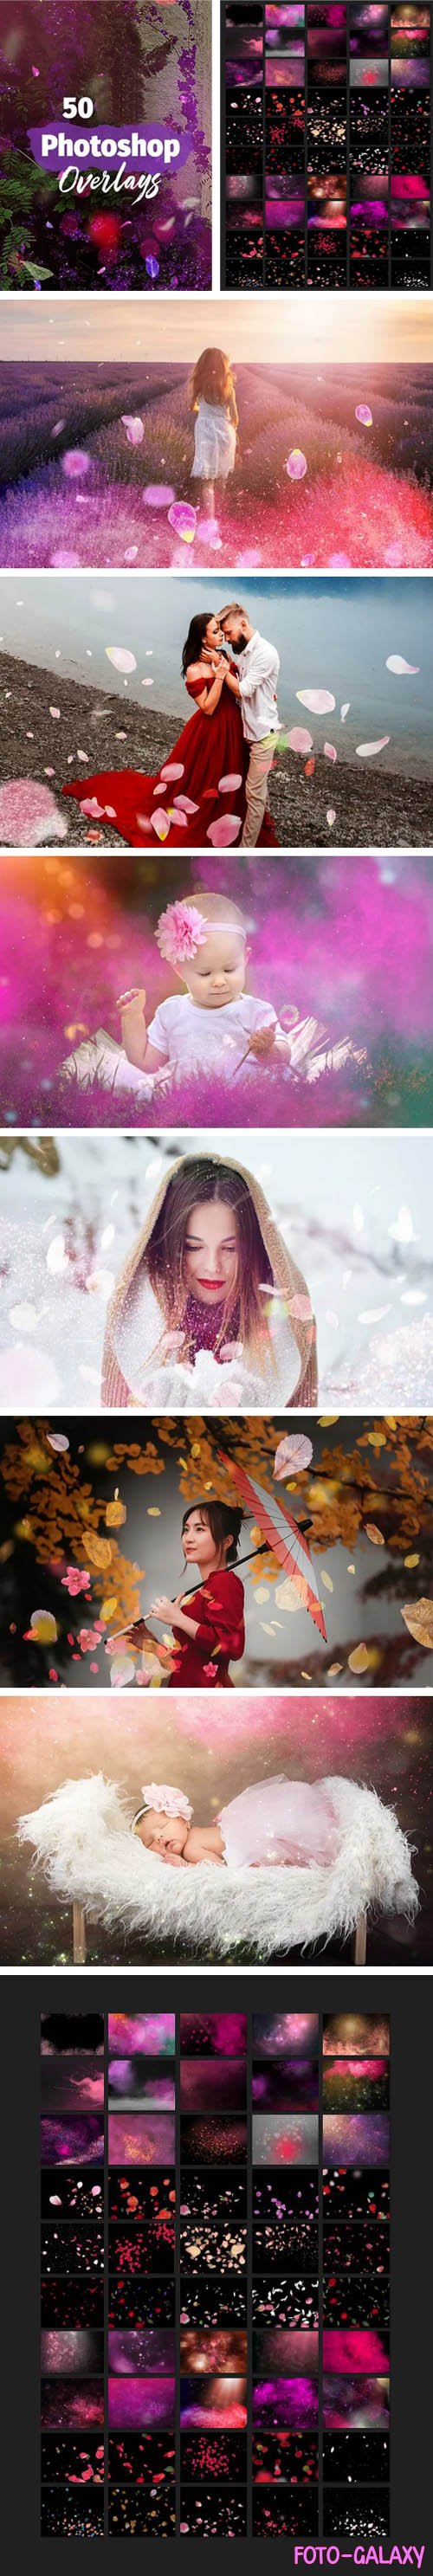 50 Photoshop Overlays Collection